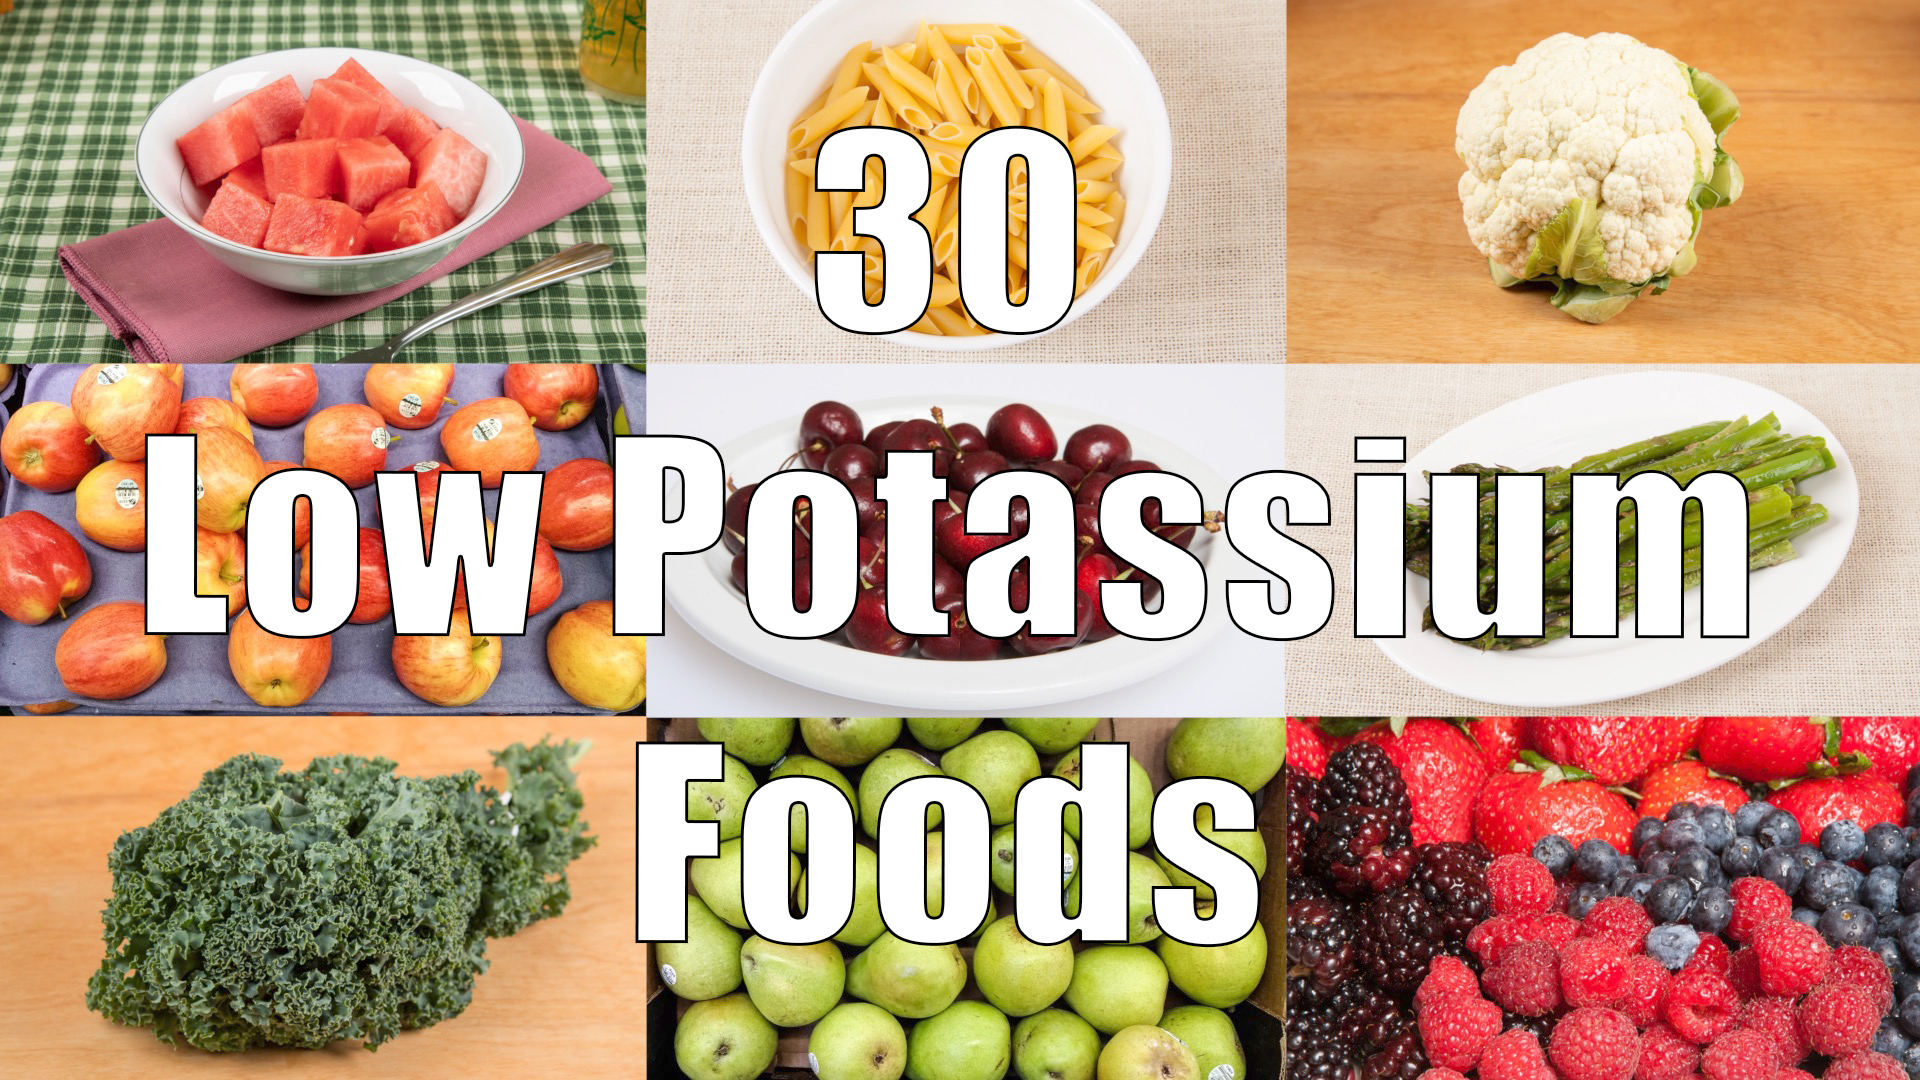 Low Potassium Foods For Diabetics - Best Culinary and Food